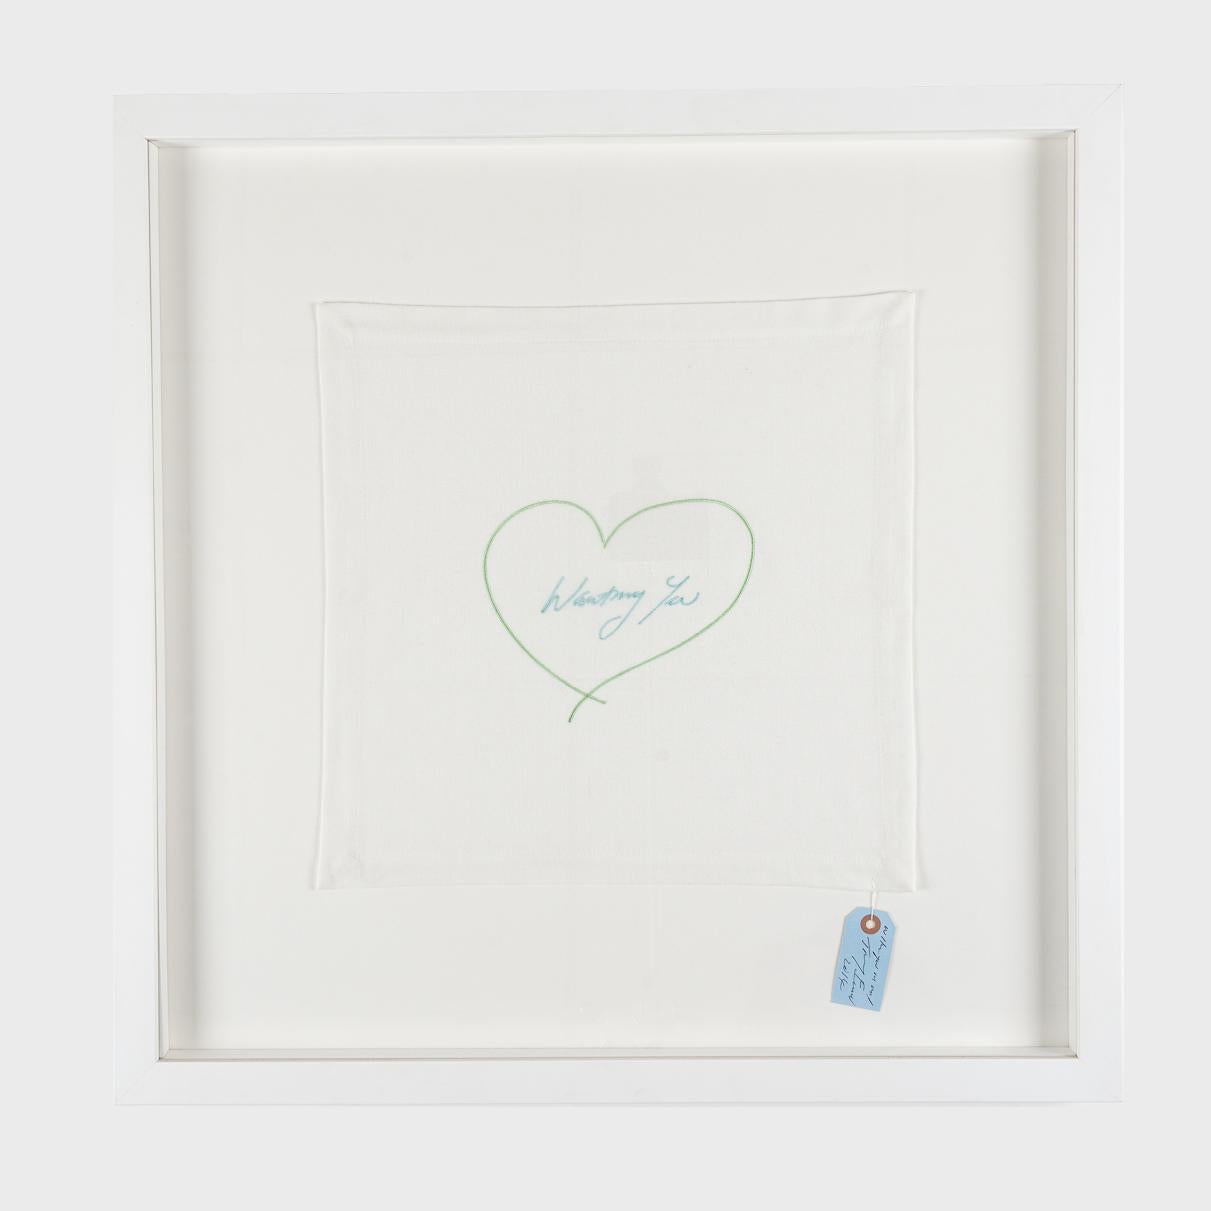 Wanting You (Green and Blue) - Print by Tracey Emin